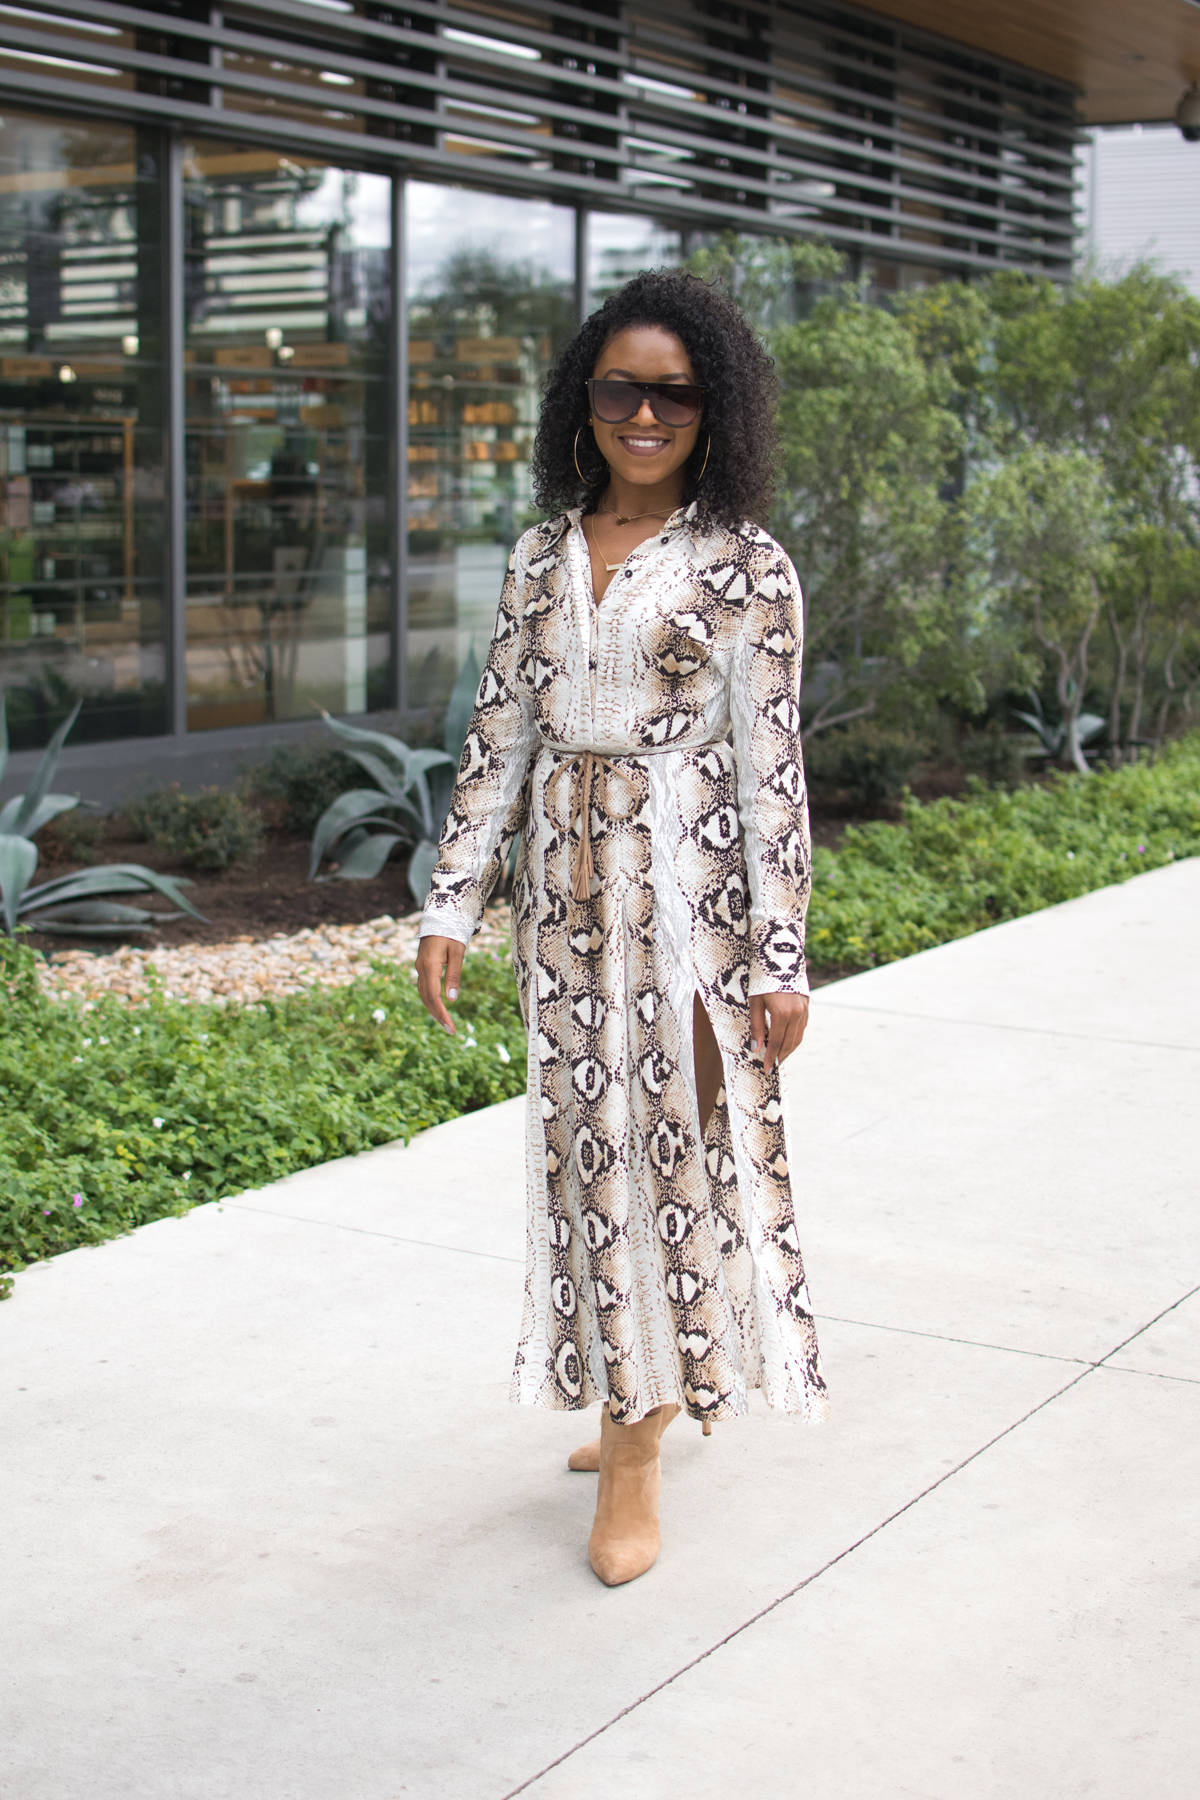 Trying the Snake Print Trend for Fall-4 - Venti Fashion